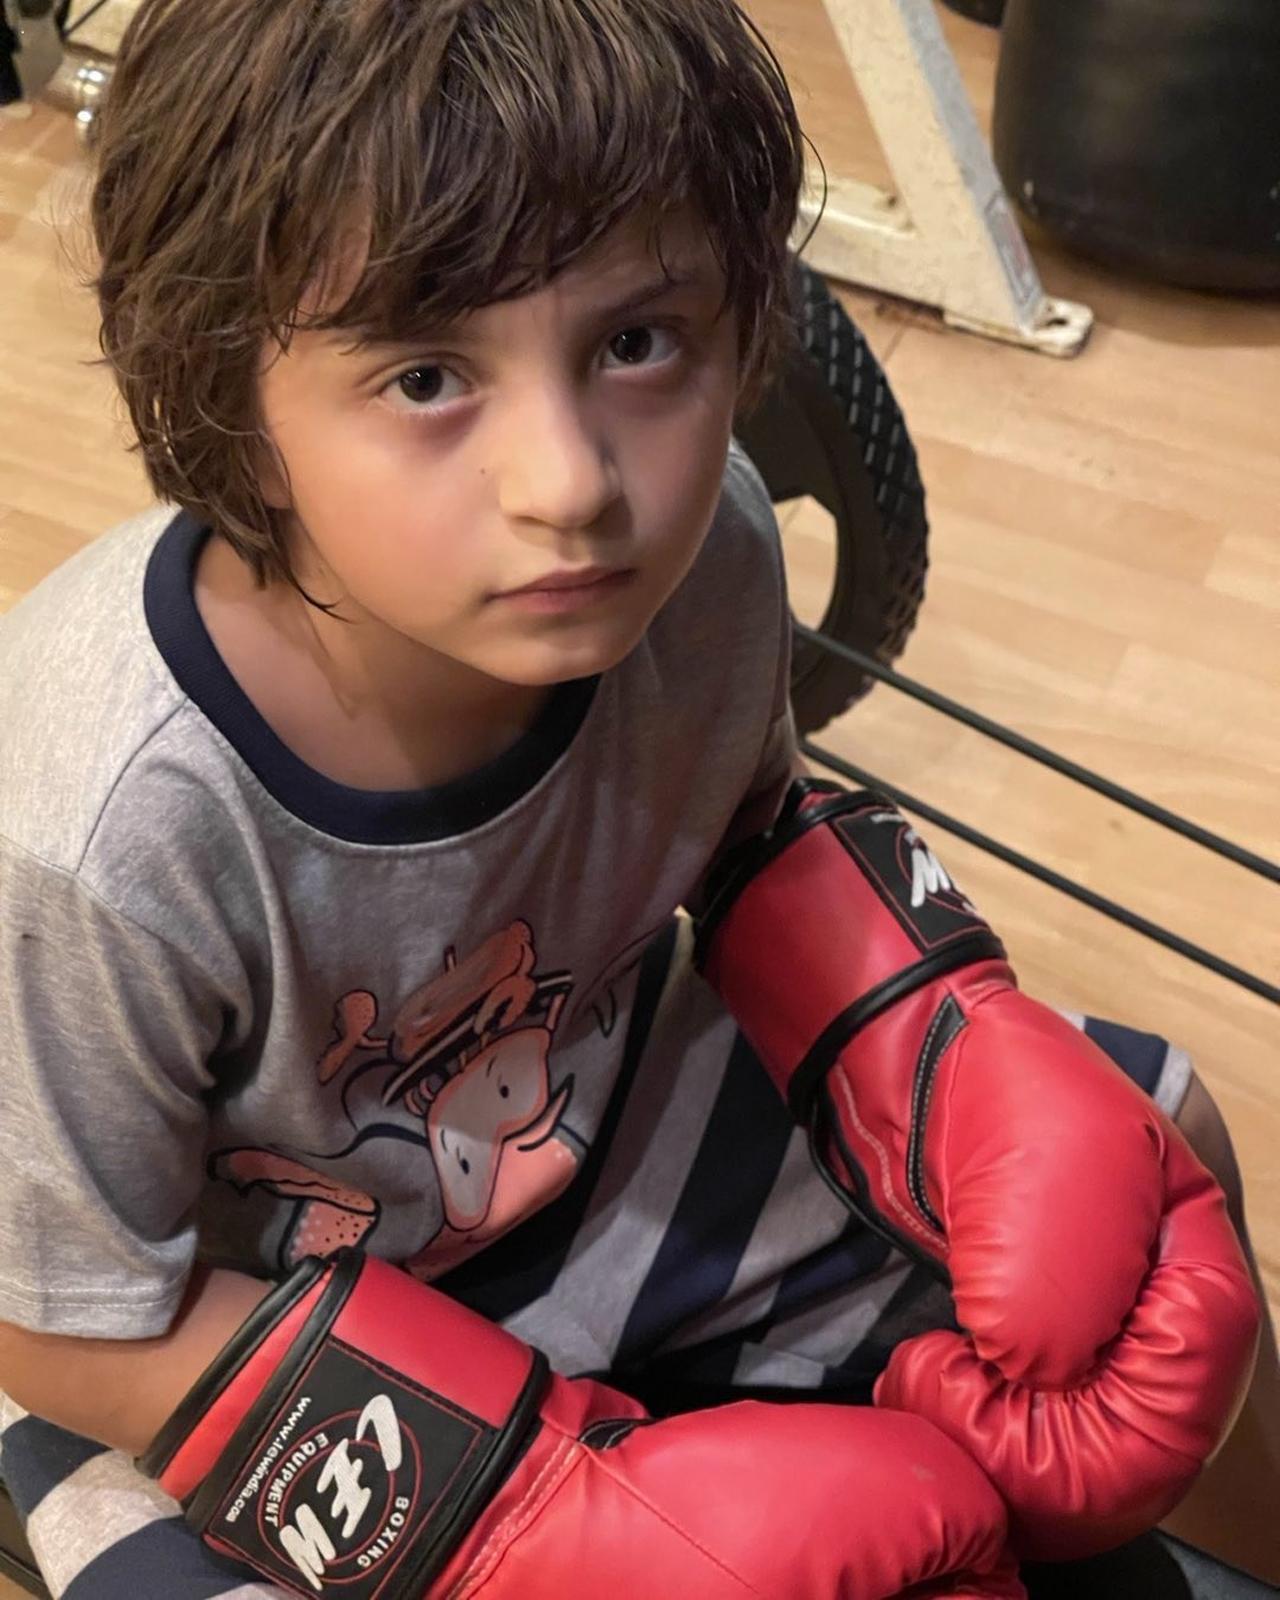 Adorable pictures of Shah Rukh Khan and Gauri Khan's son AbRam you  shouldn't miss | The Times of India